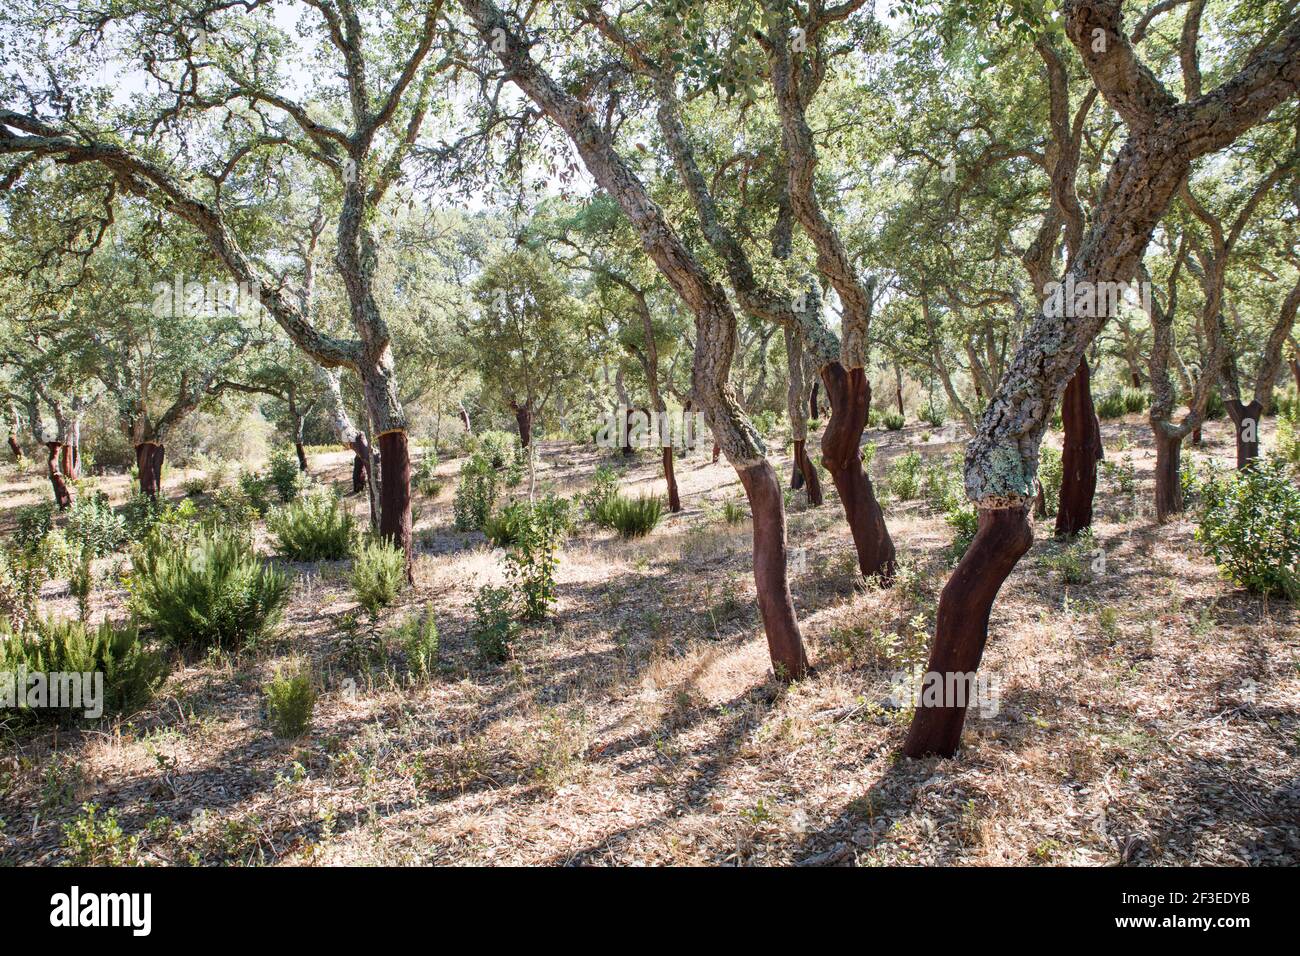 Cork Oak Tree woods and forests in Sardinia Stock Photo